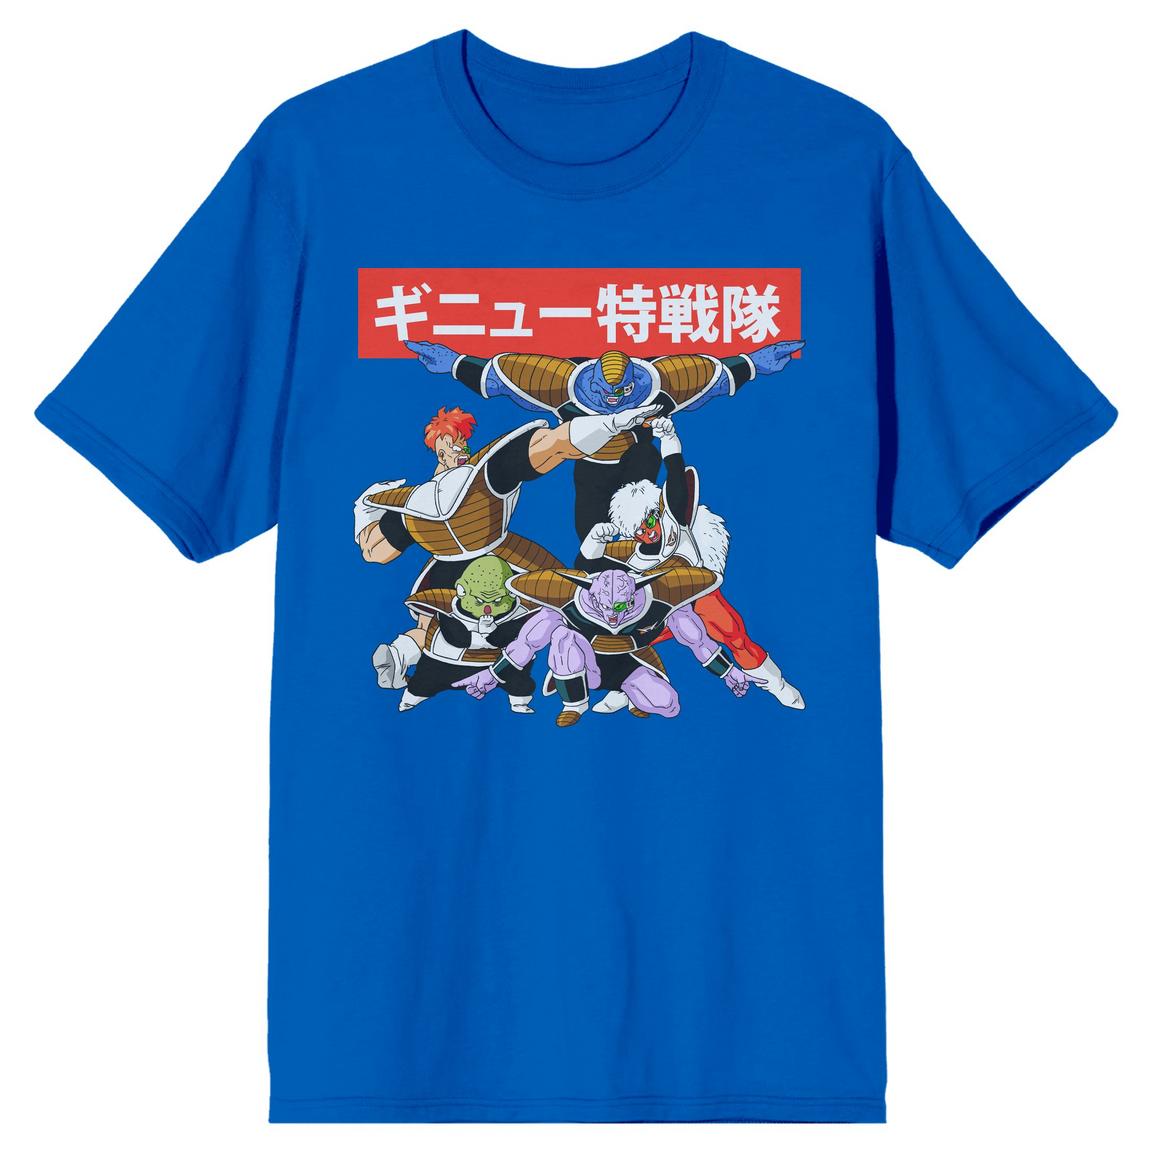 Dragon Ball Z Anime Character Group Royal Blue Short Sleeve Graphic T-Shirt, Size: Large, Bioworld Merchandising